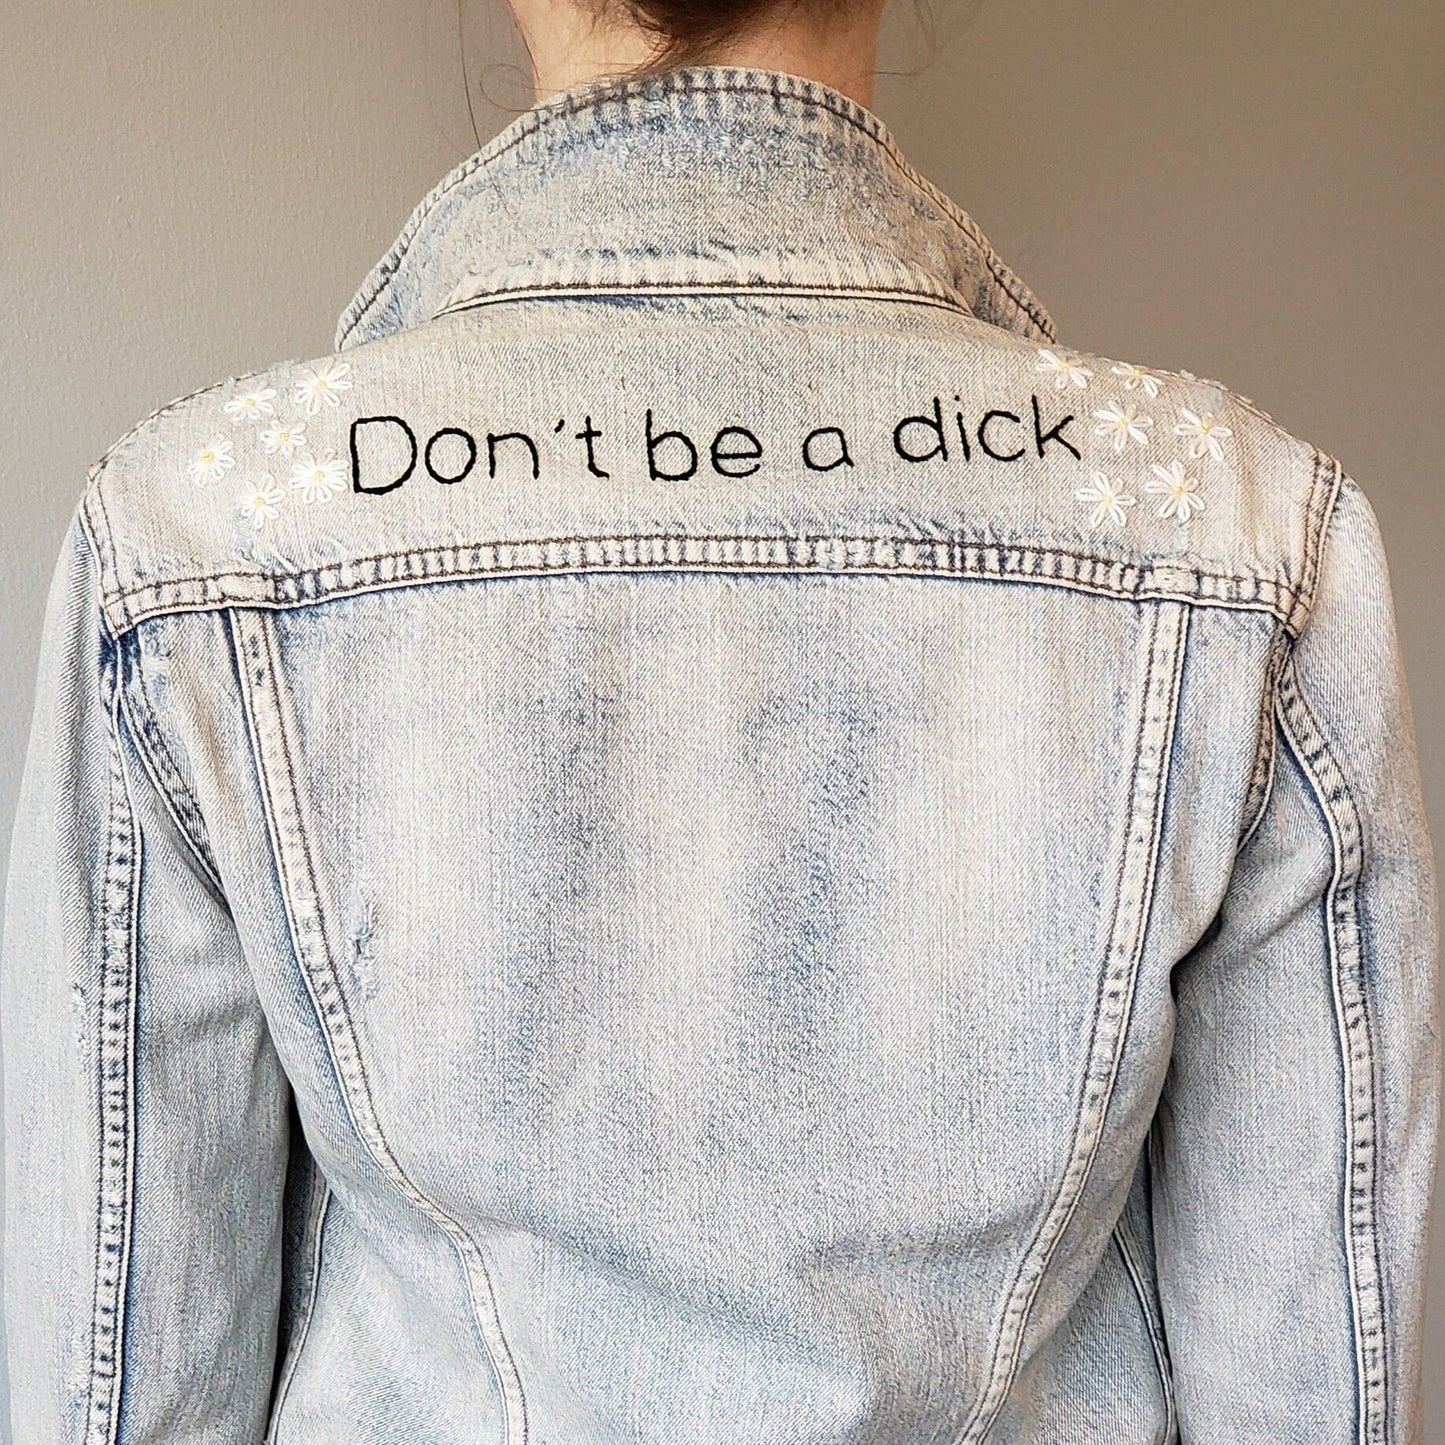 A white woman wears an acid wash denim jacket in front of a light grey background. The jacket has "Don't be a dick" hand embroidered in black, and daises sewn on both shoulders. There are 6 daisies on each shoulder.